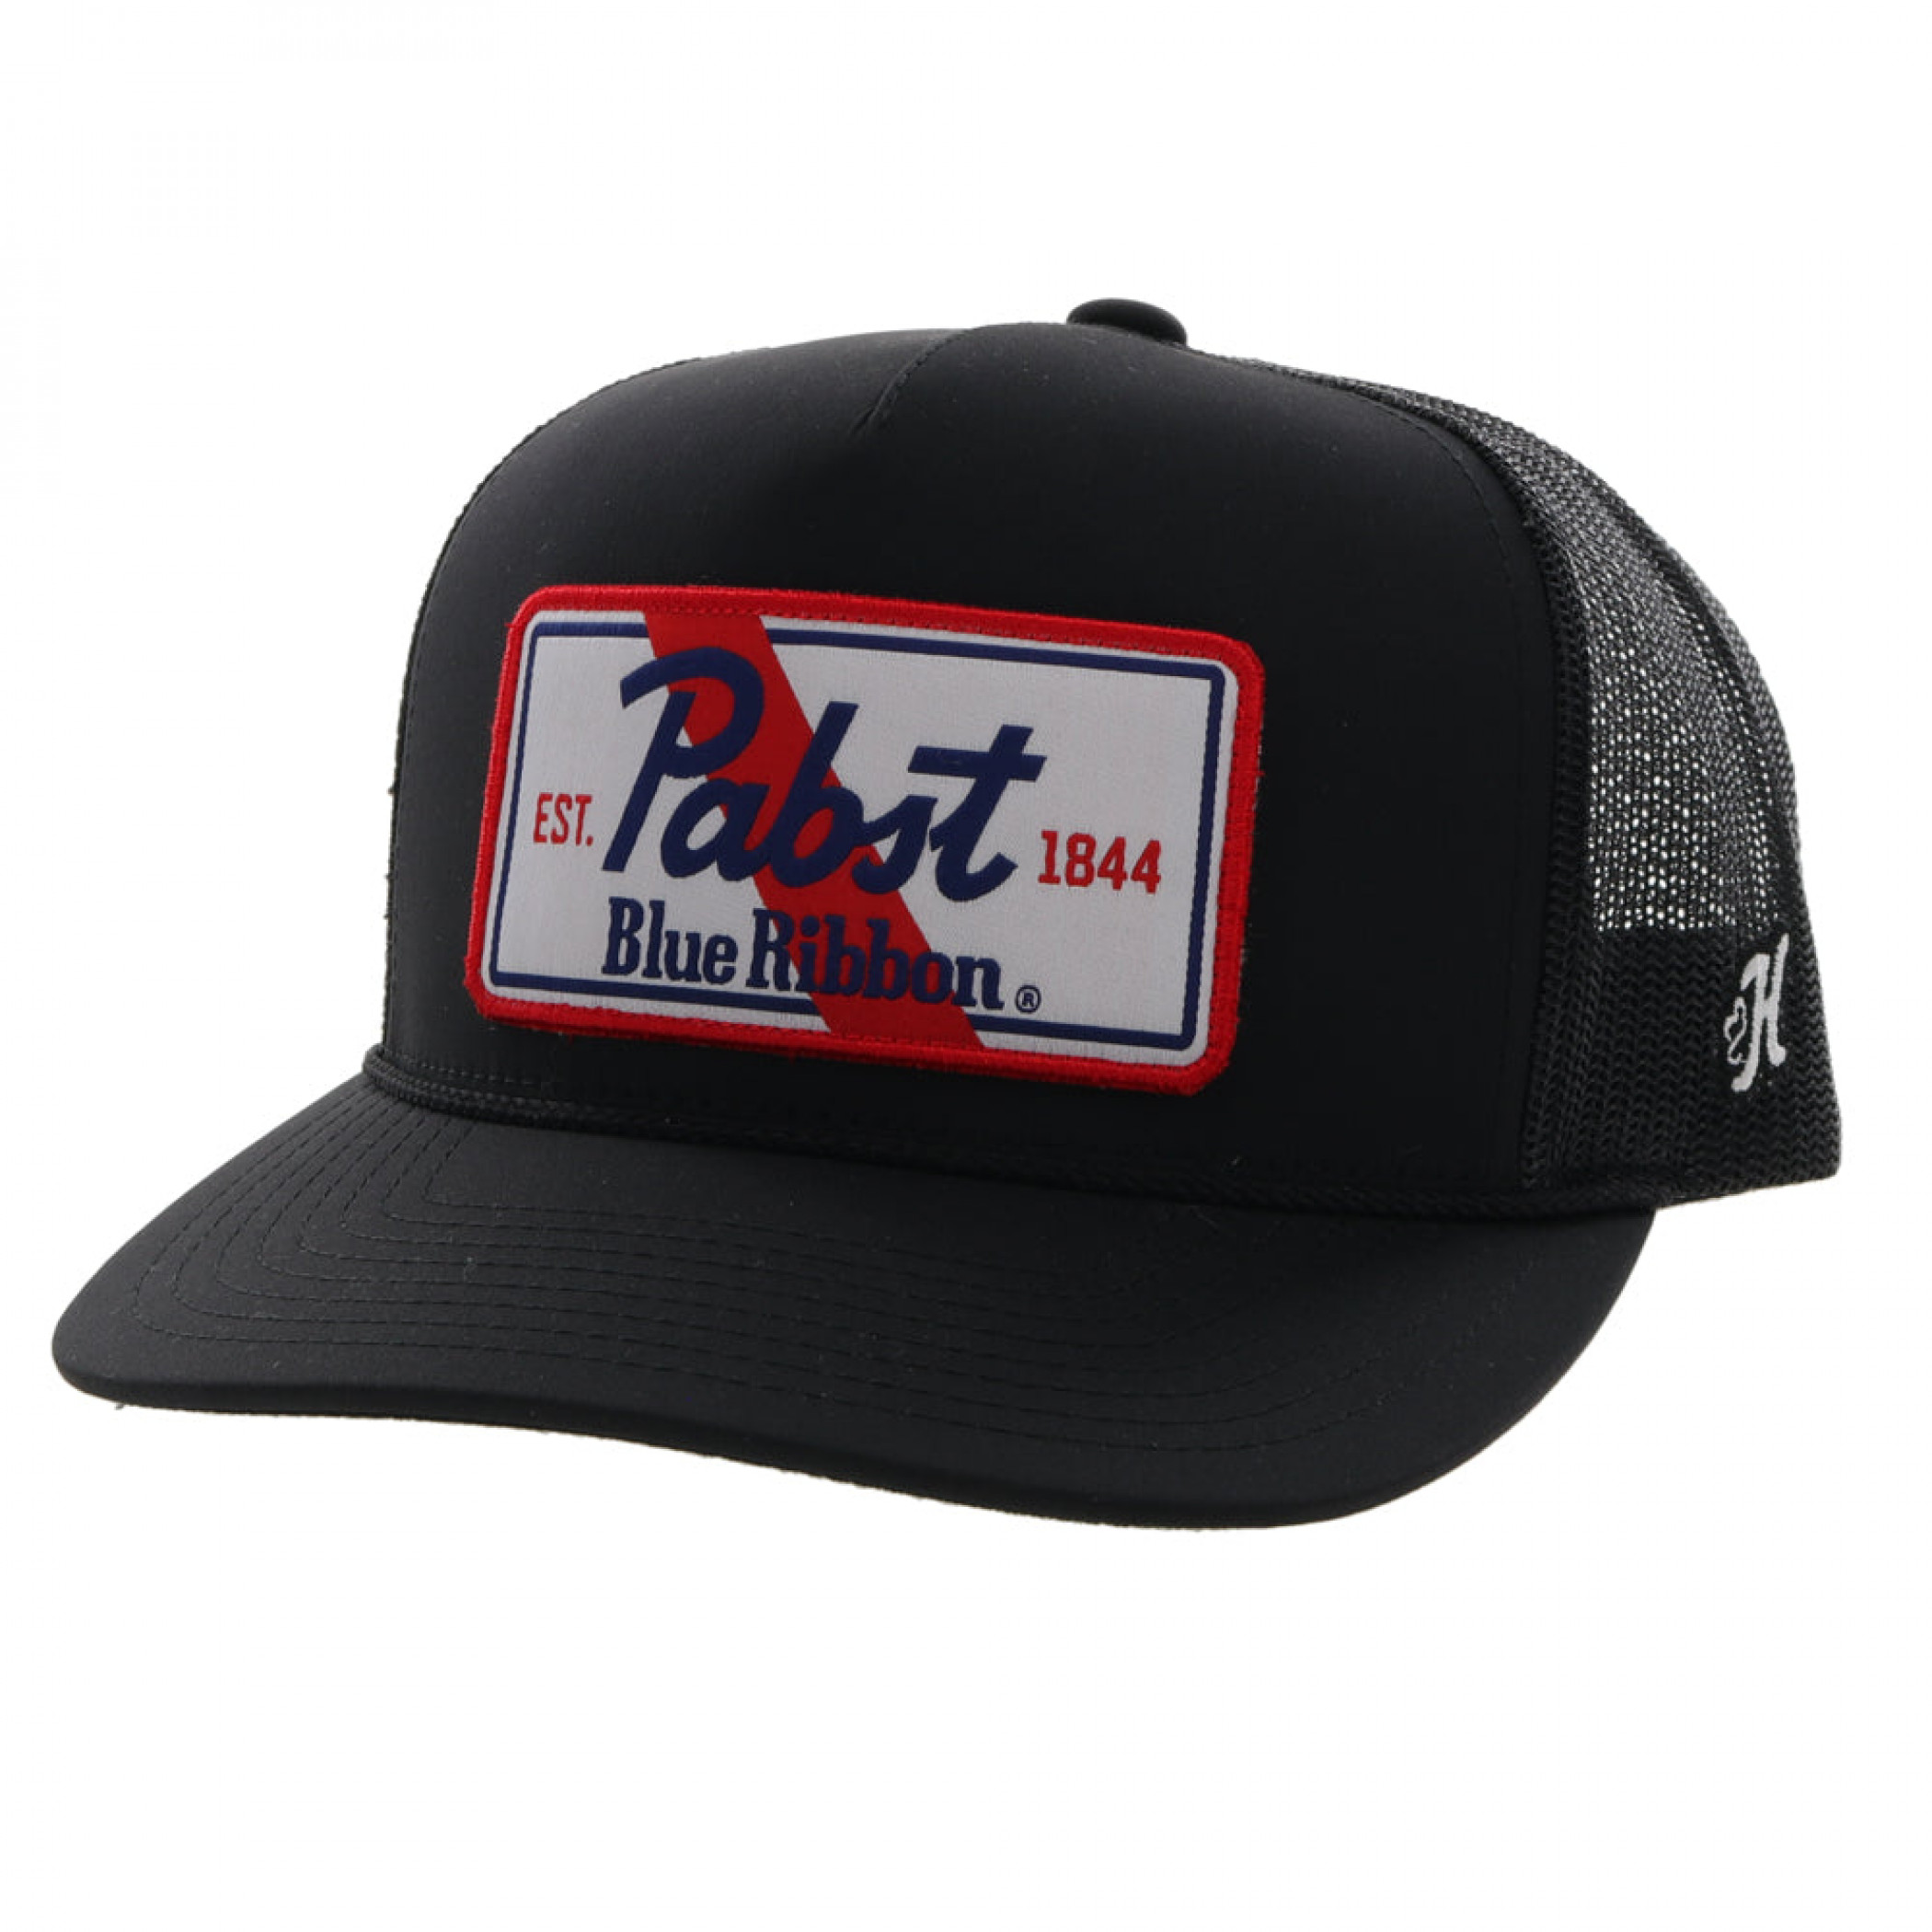 Pabst Blue Ribbon Embroidered Patch Snapback Hybrid Bill Trucker Hat